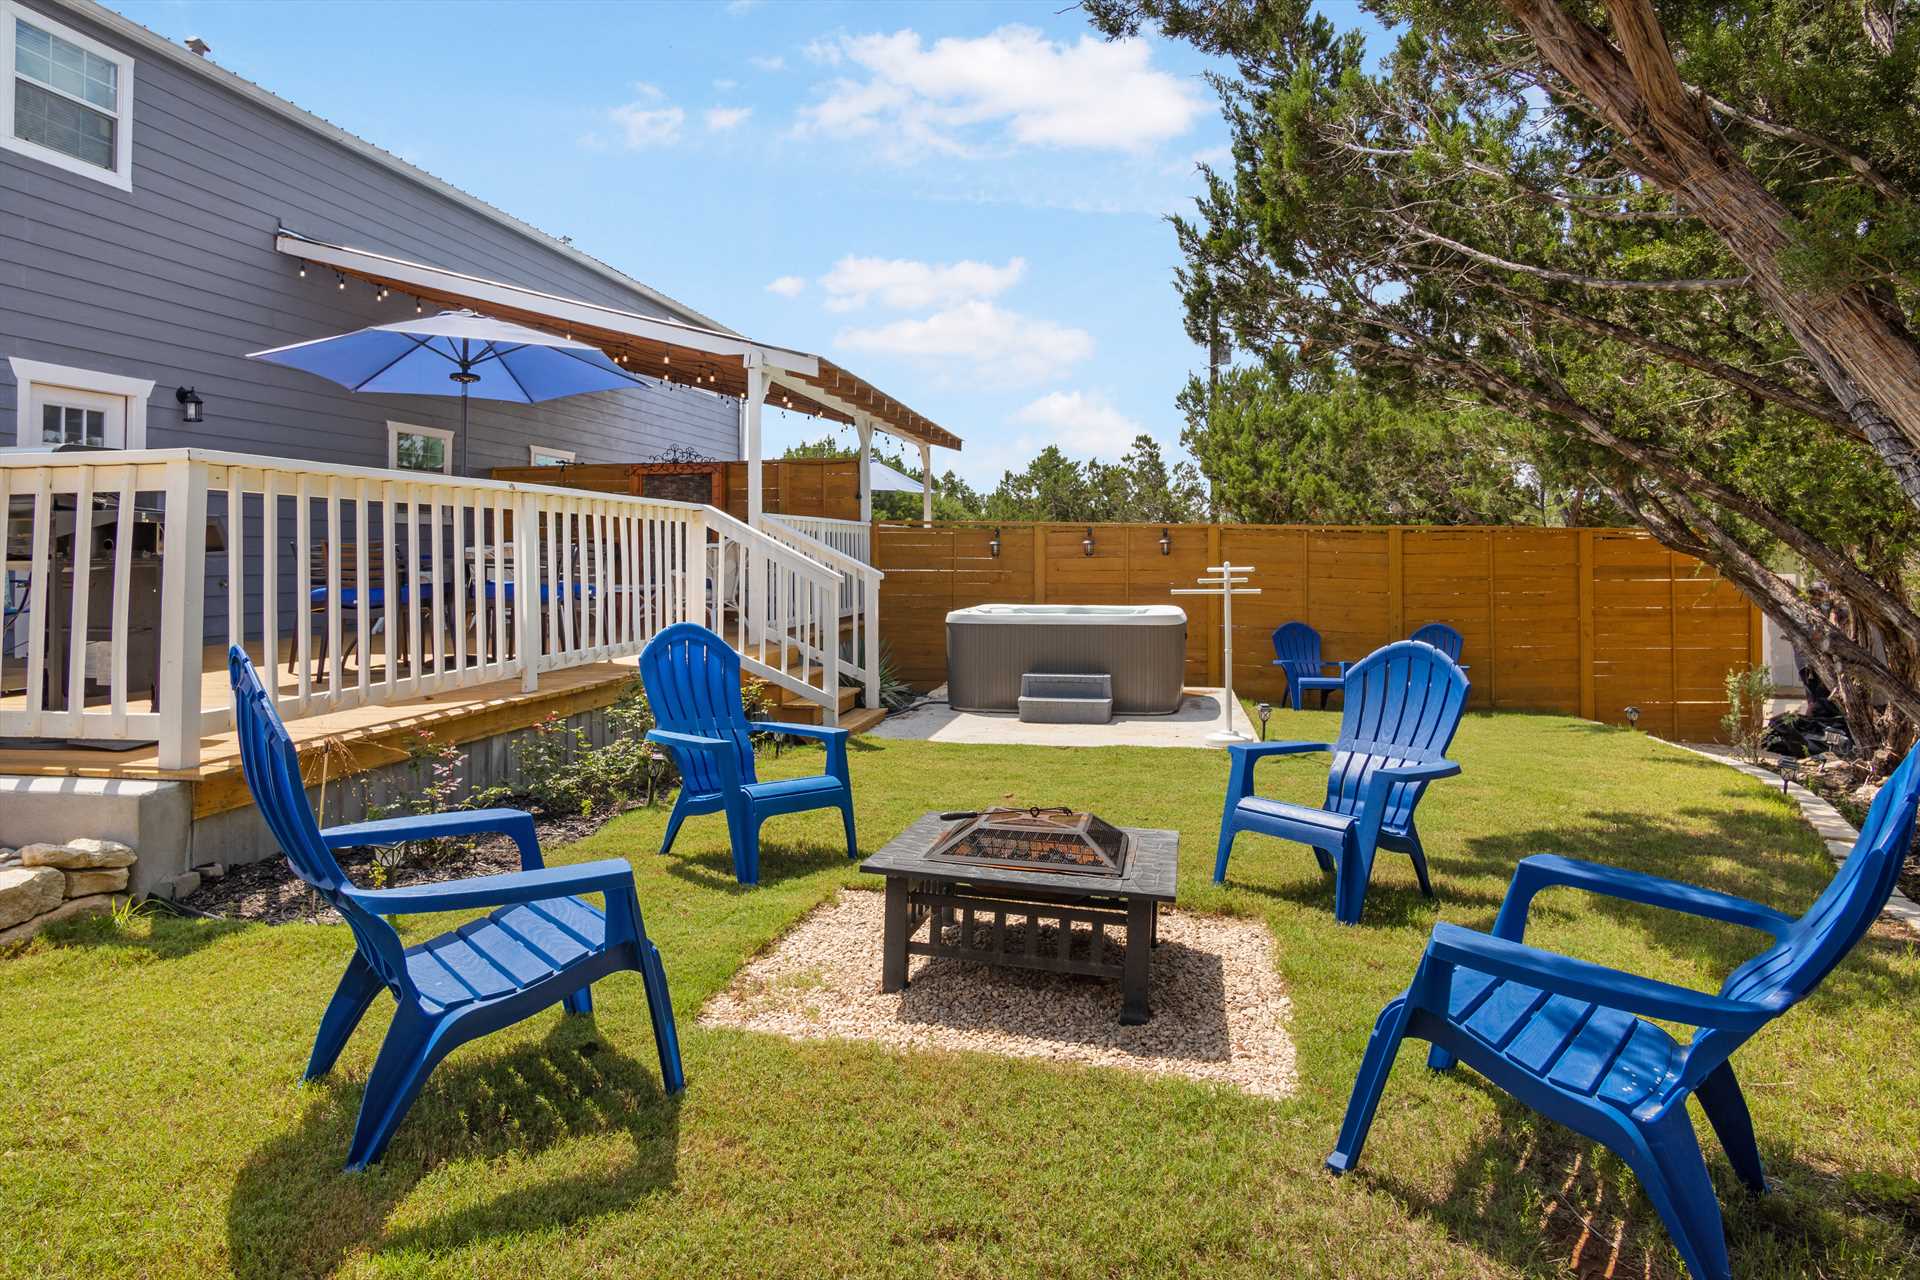                                                 Gather round the fire pit for conversation, roasted snacks, and a good look at the starry Texas night skies!